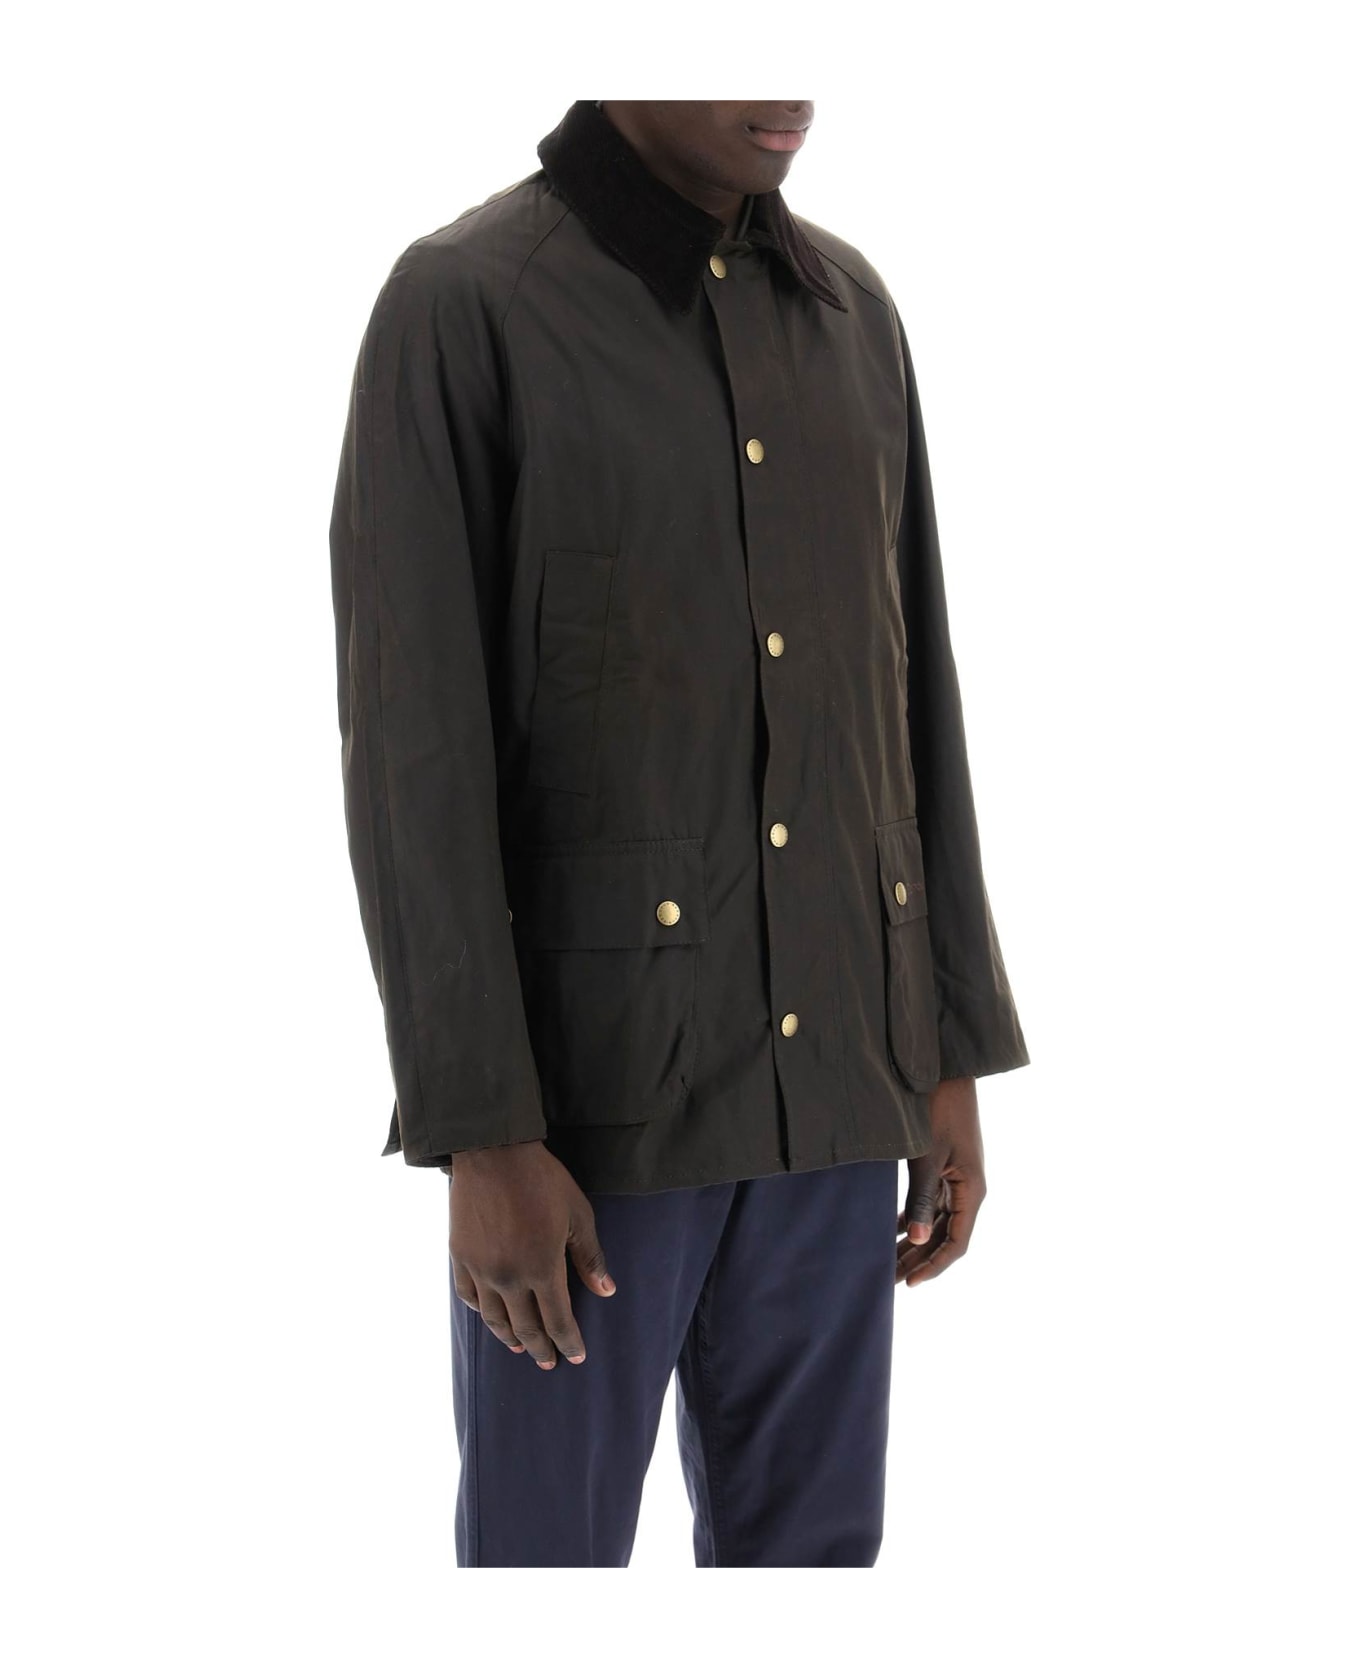 Barbour Ashby Waxed Jacket - OLIVE (Green)